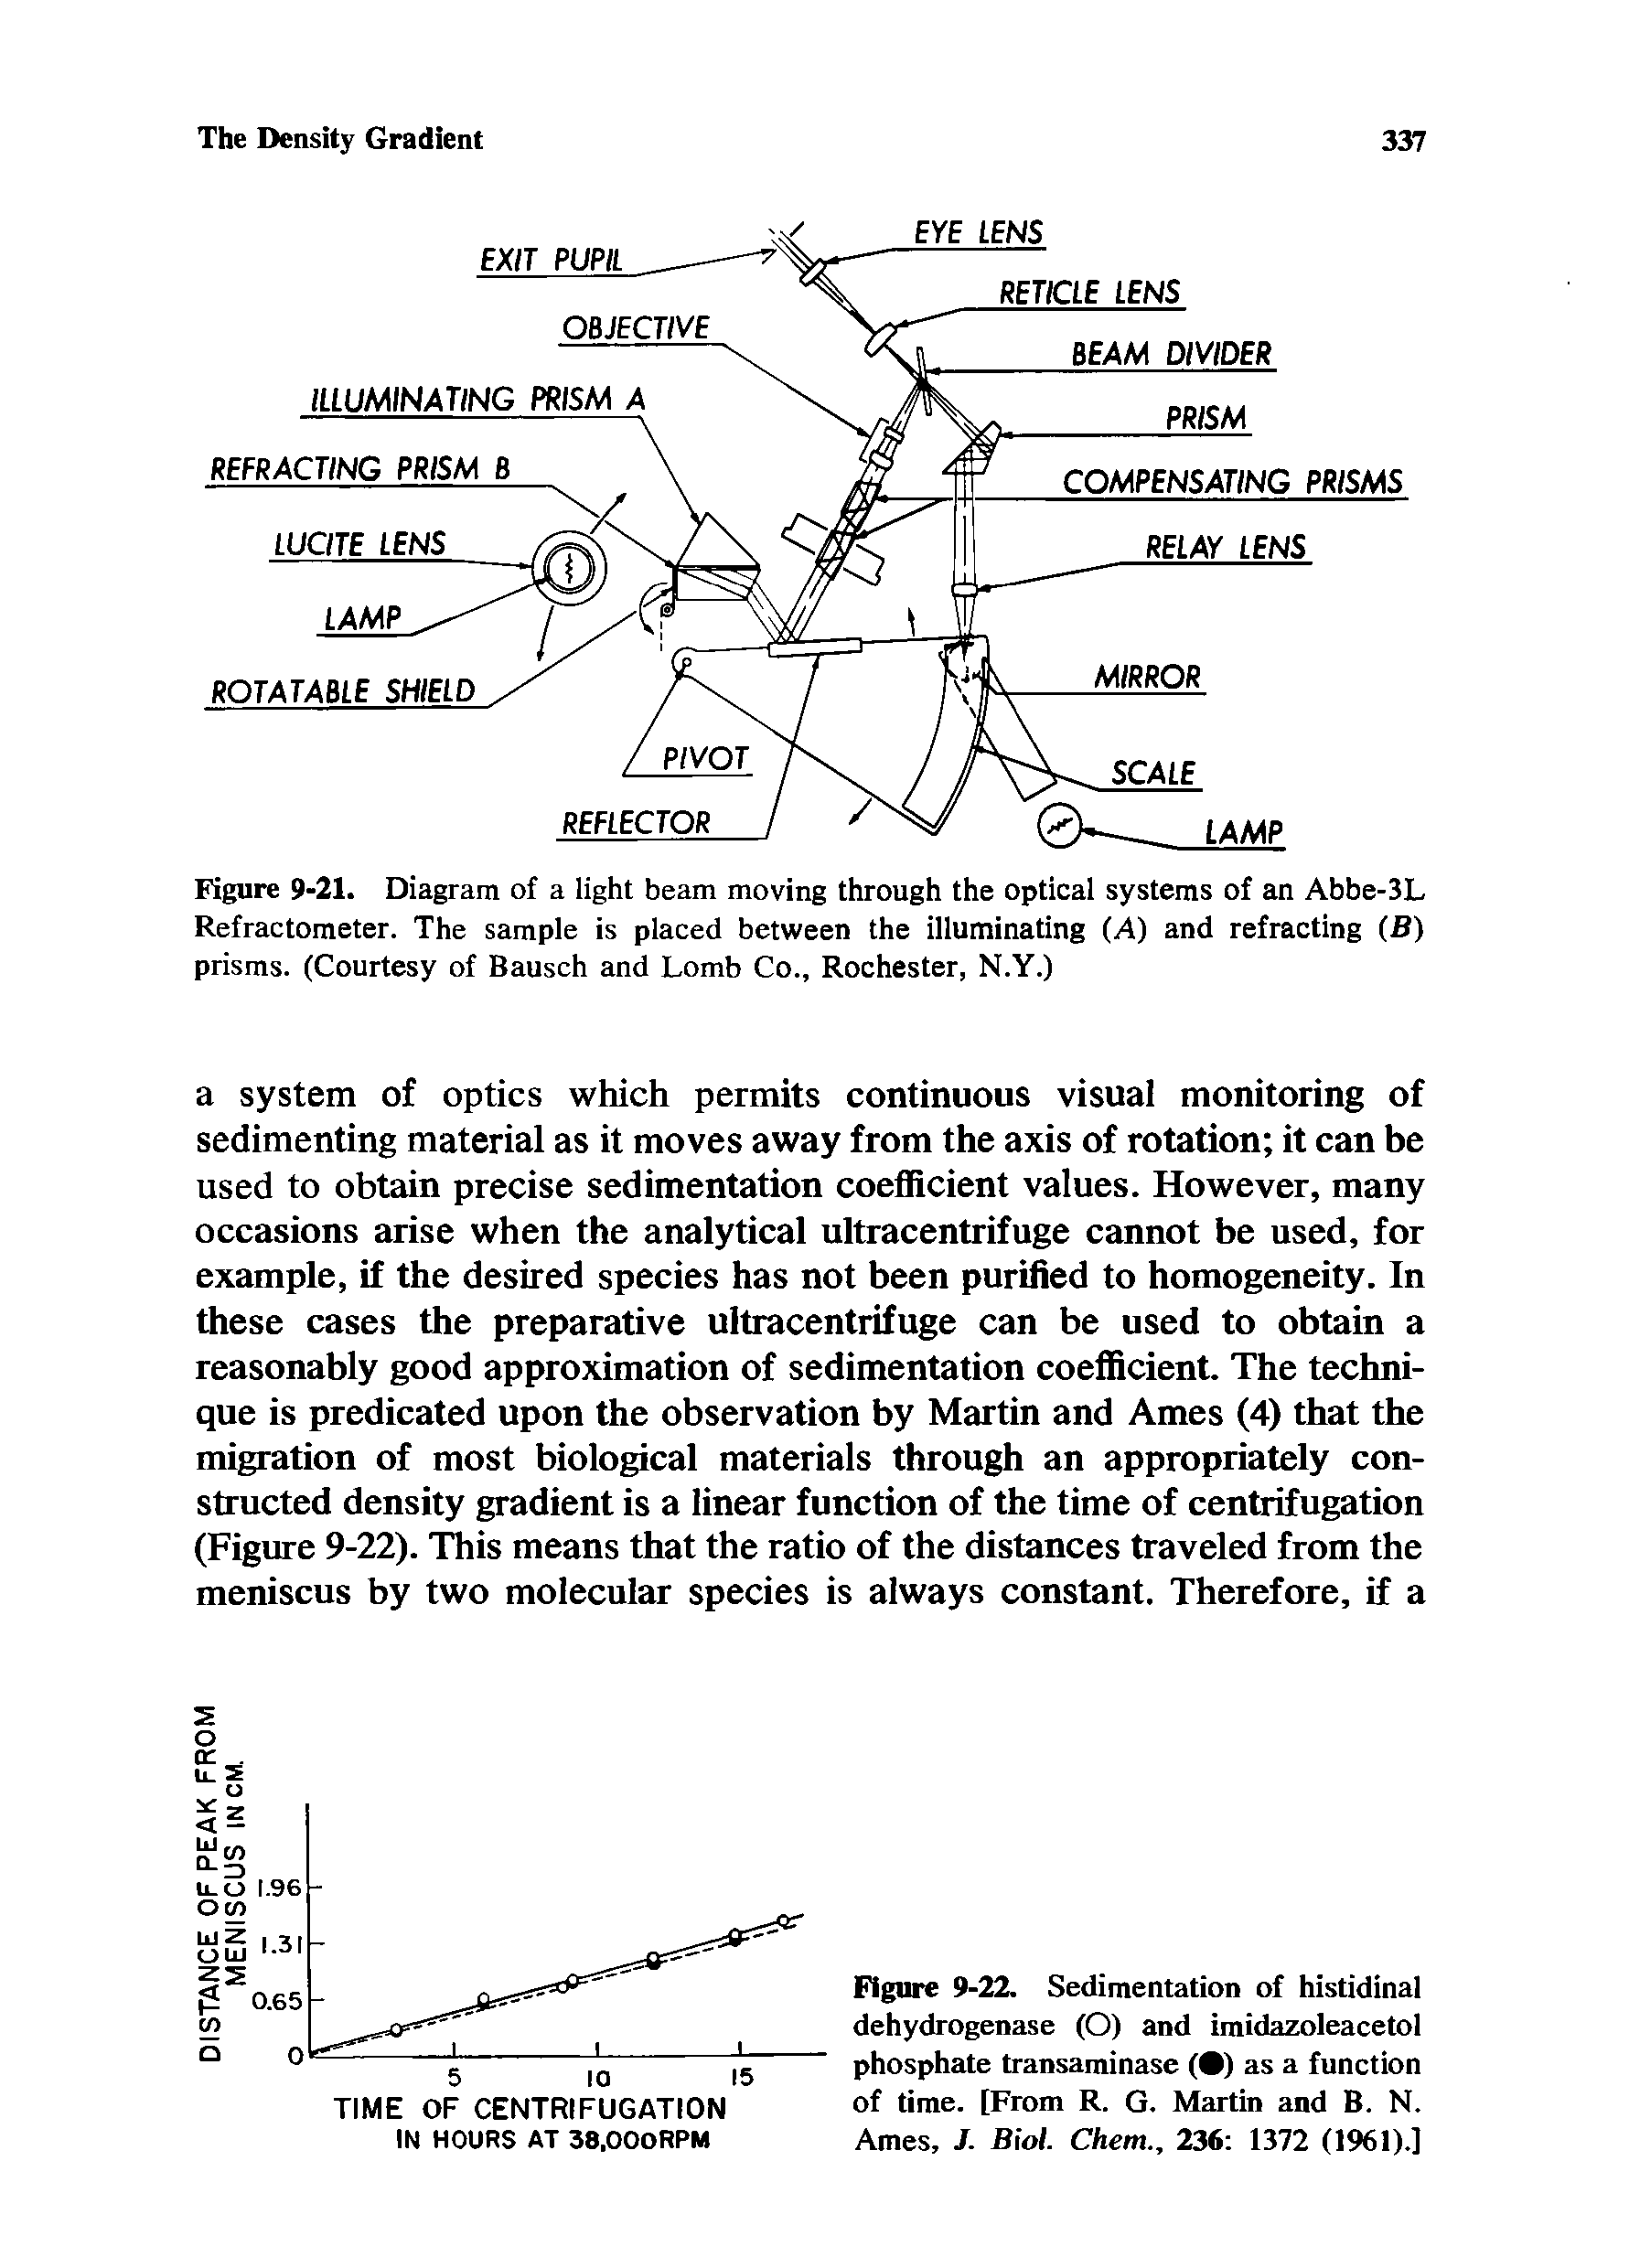 Figure 9-22. Sedimentation of histidinal dehydrogenase (O) and imidazoleacetol phosphate transaminase (9) as a function of time. [From R. G. Martin and B. N. Ames, J. Biol. Chem., 236 1372 (1961).]...